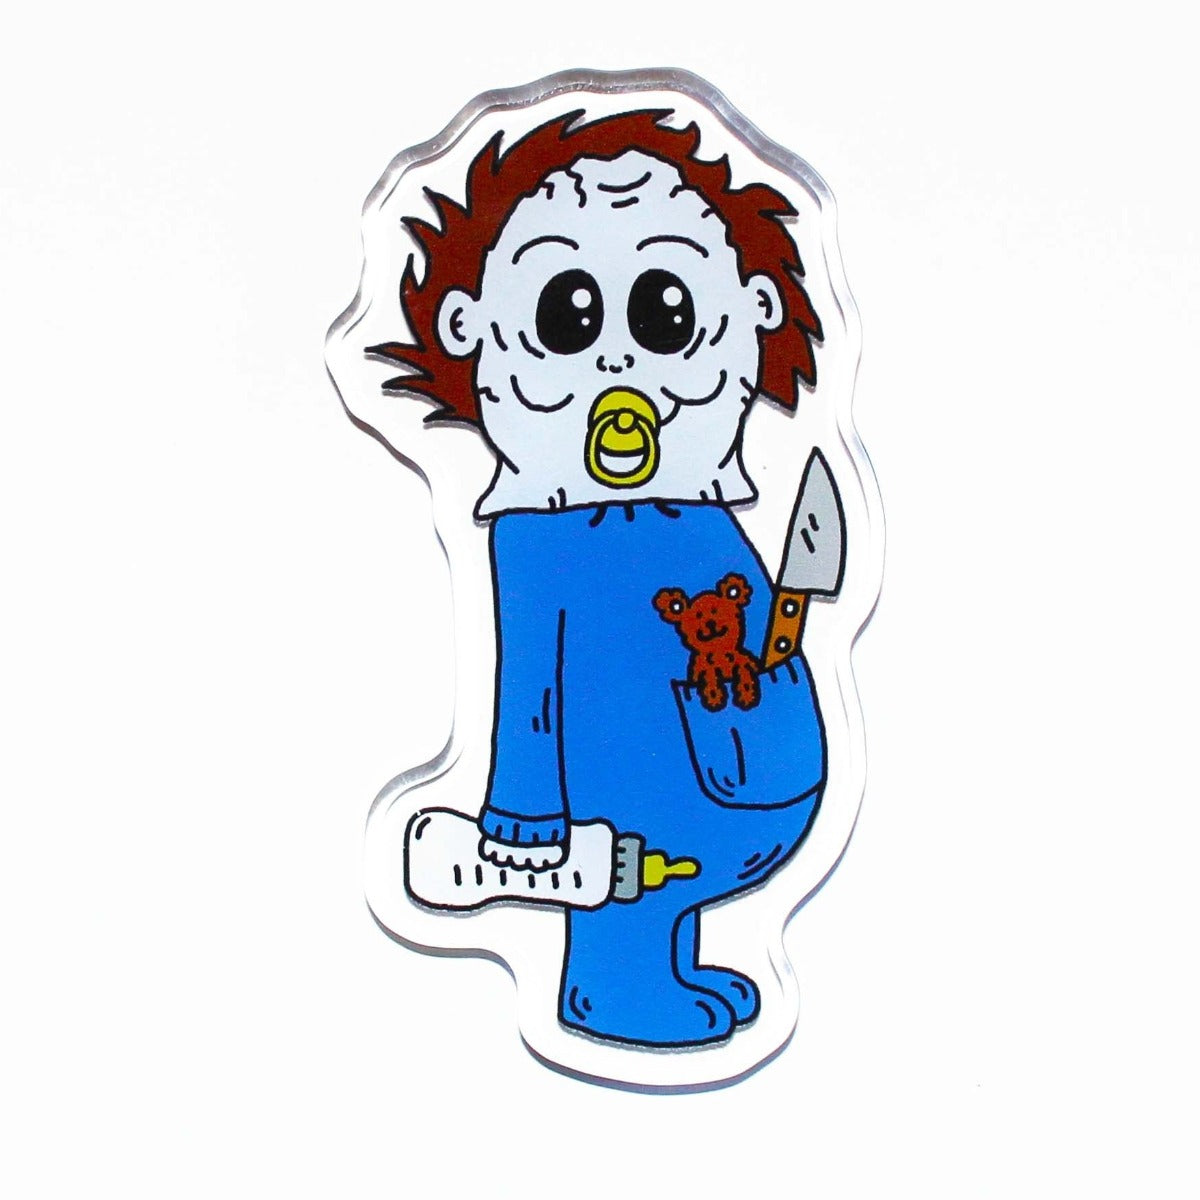 Baby Michael Myers with his baby bottle, knife, killer teddy bear and his pacifier Magnet. Horror Parody by SpookyKillerBabies.com